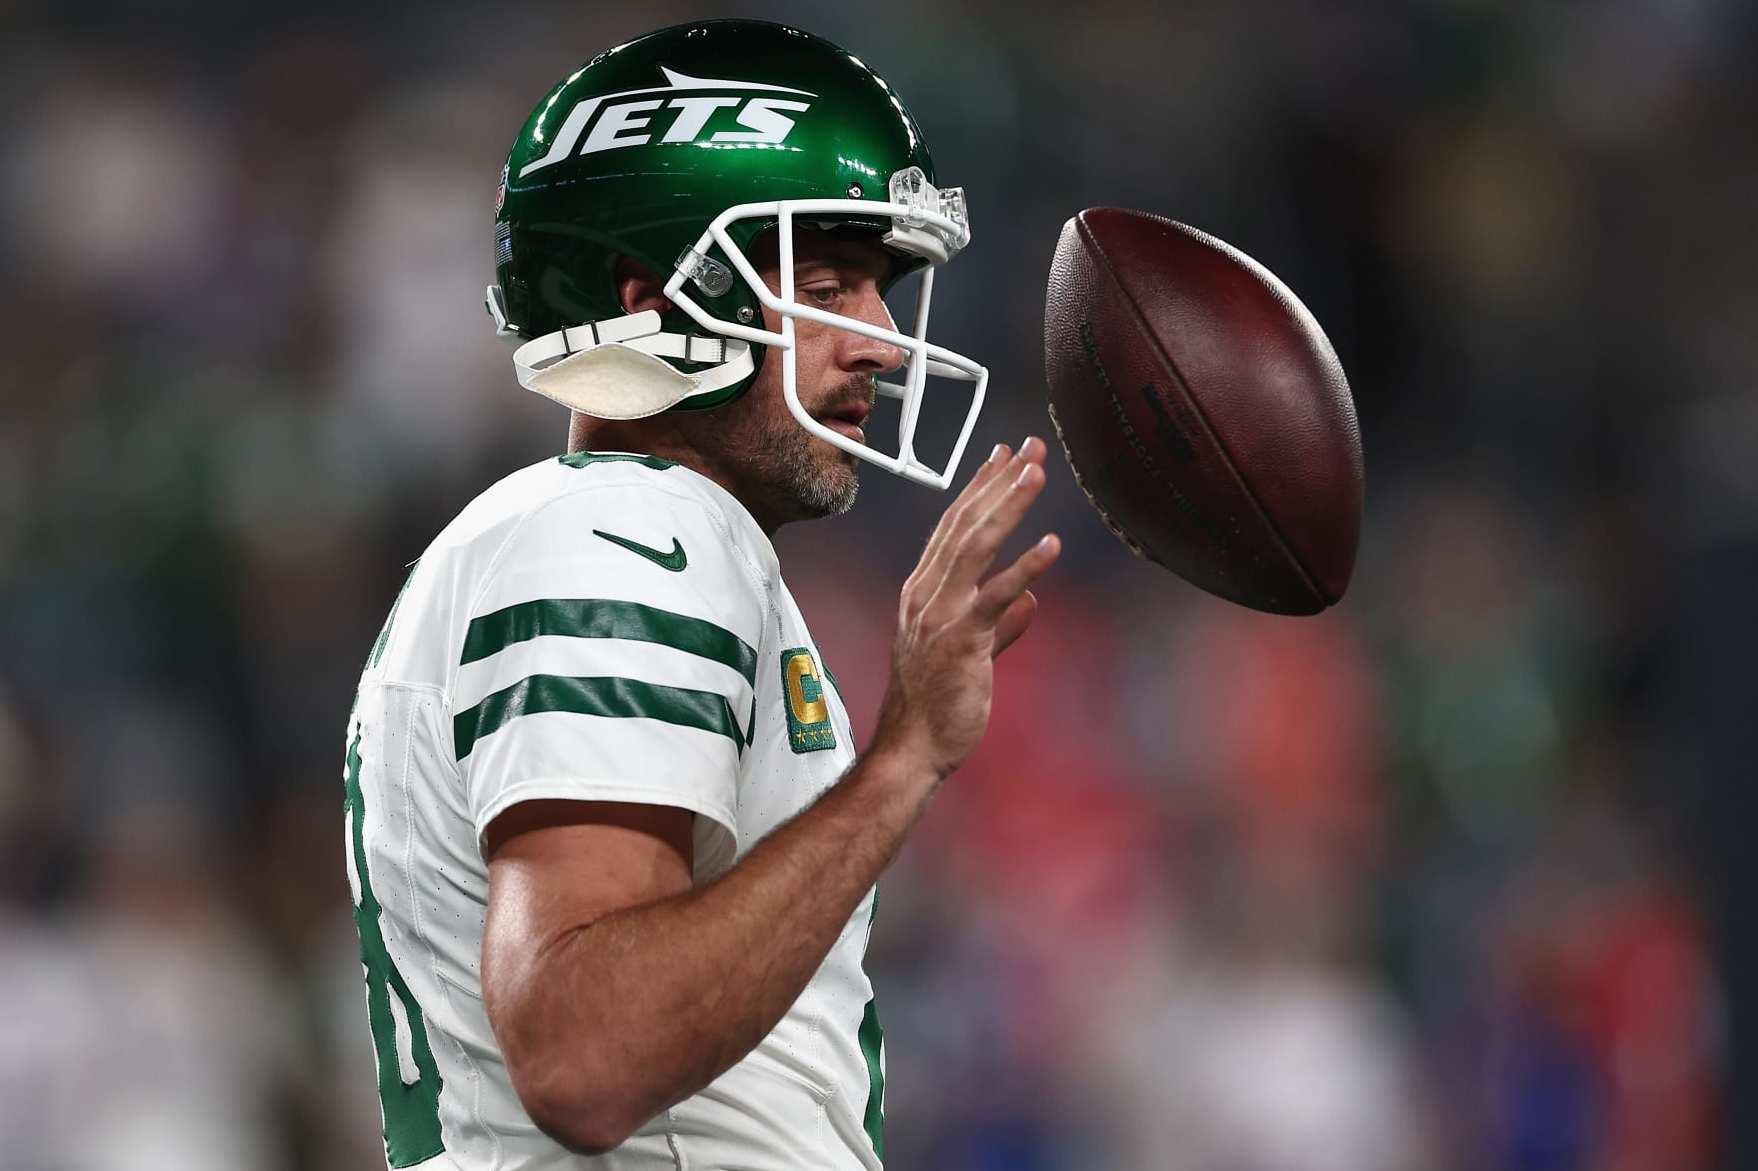 jets: Buffalo Bills vs New York Jets: How to watch Aaron Rodgers